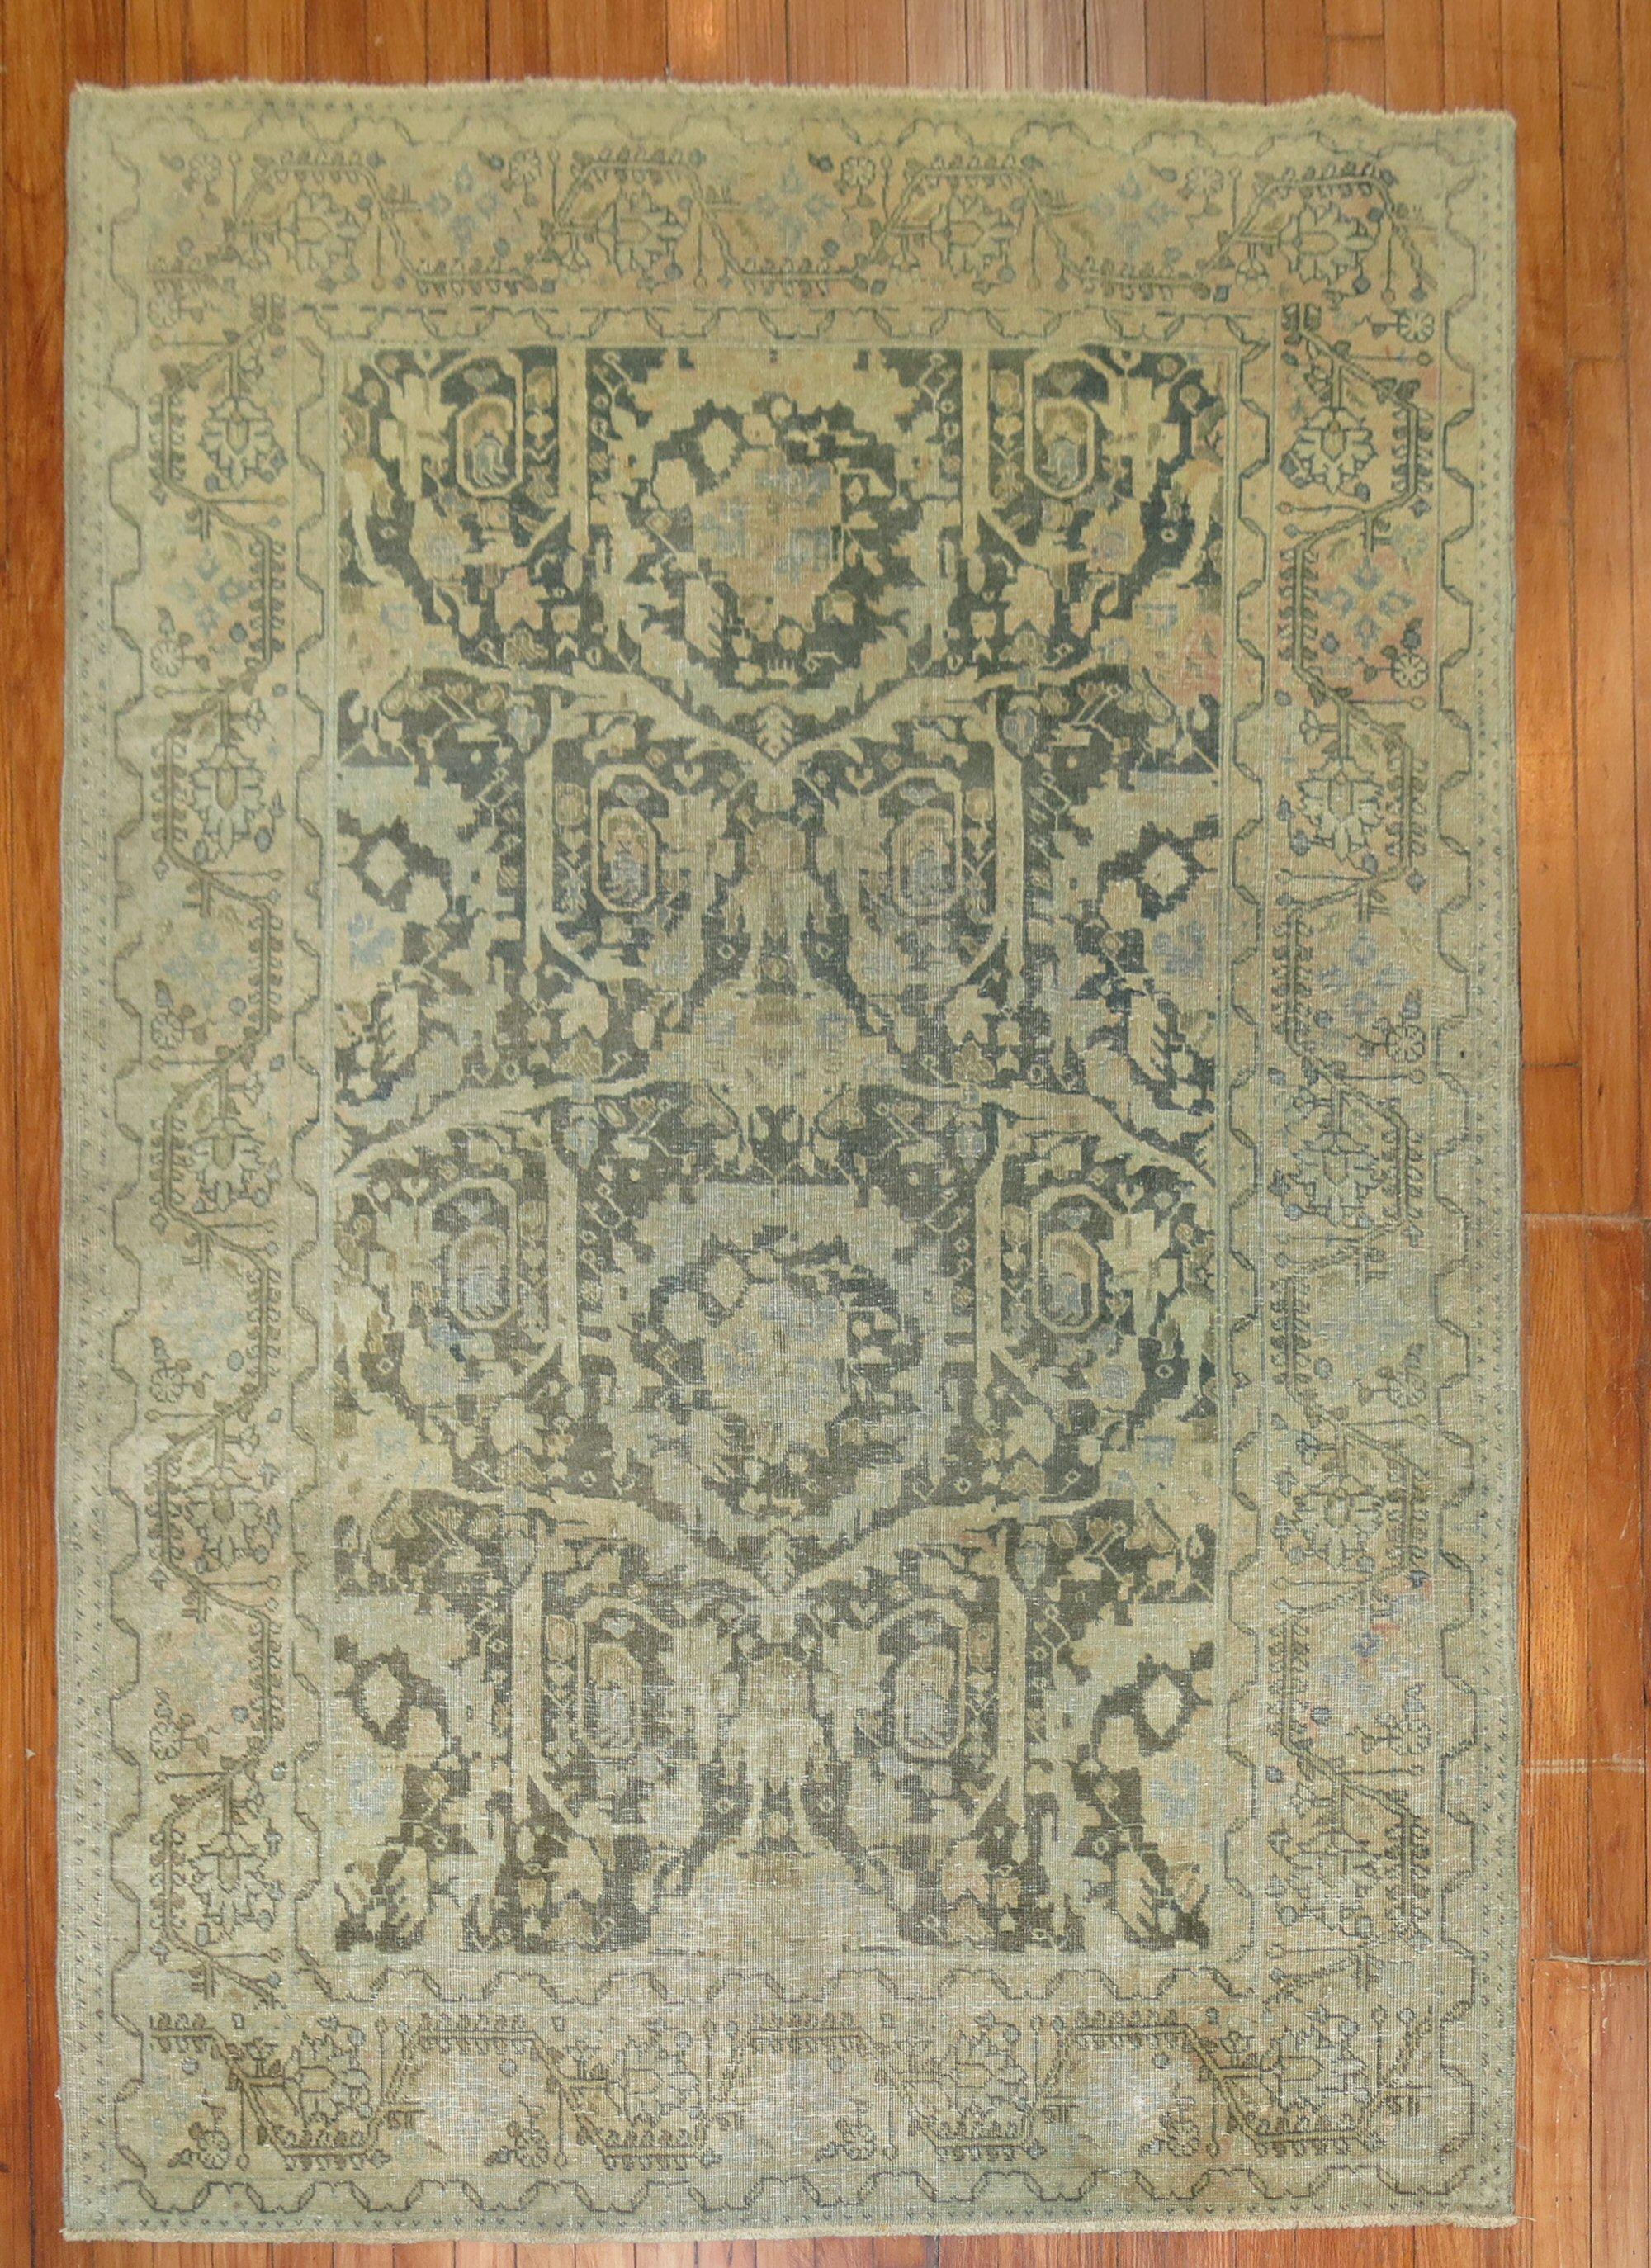 Early 20th century Persian Tabriz rug predominantly in green

Measures: 4'7'' x 6'1''.